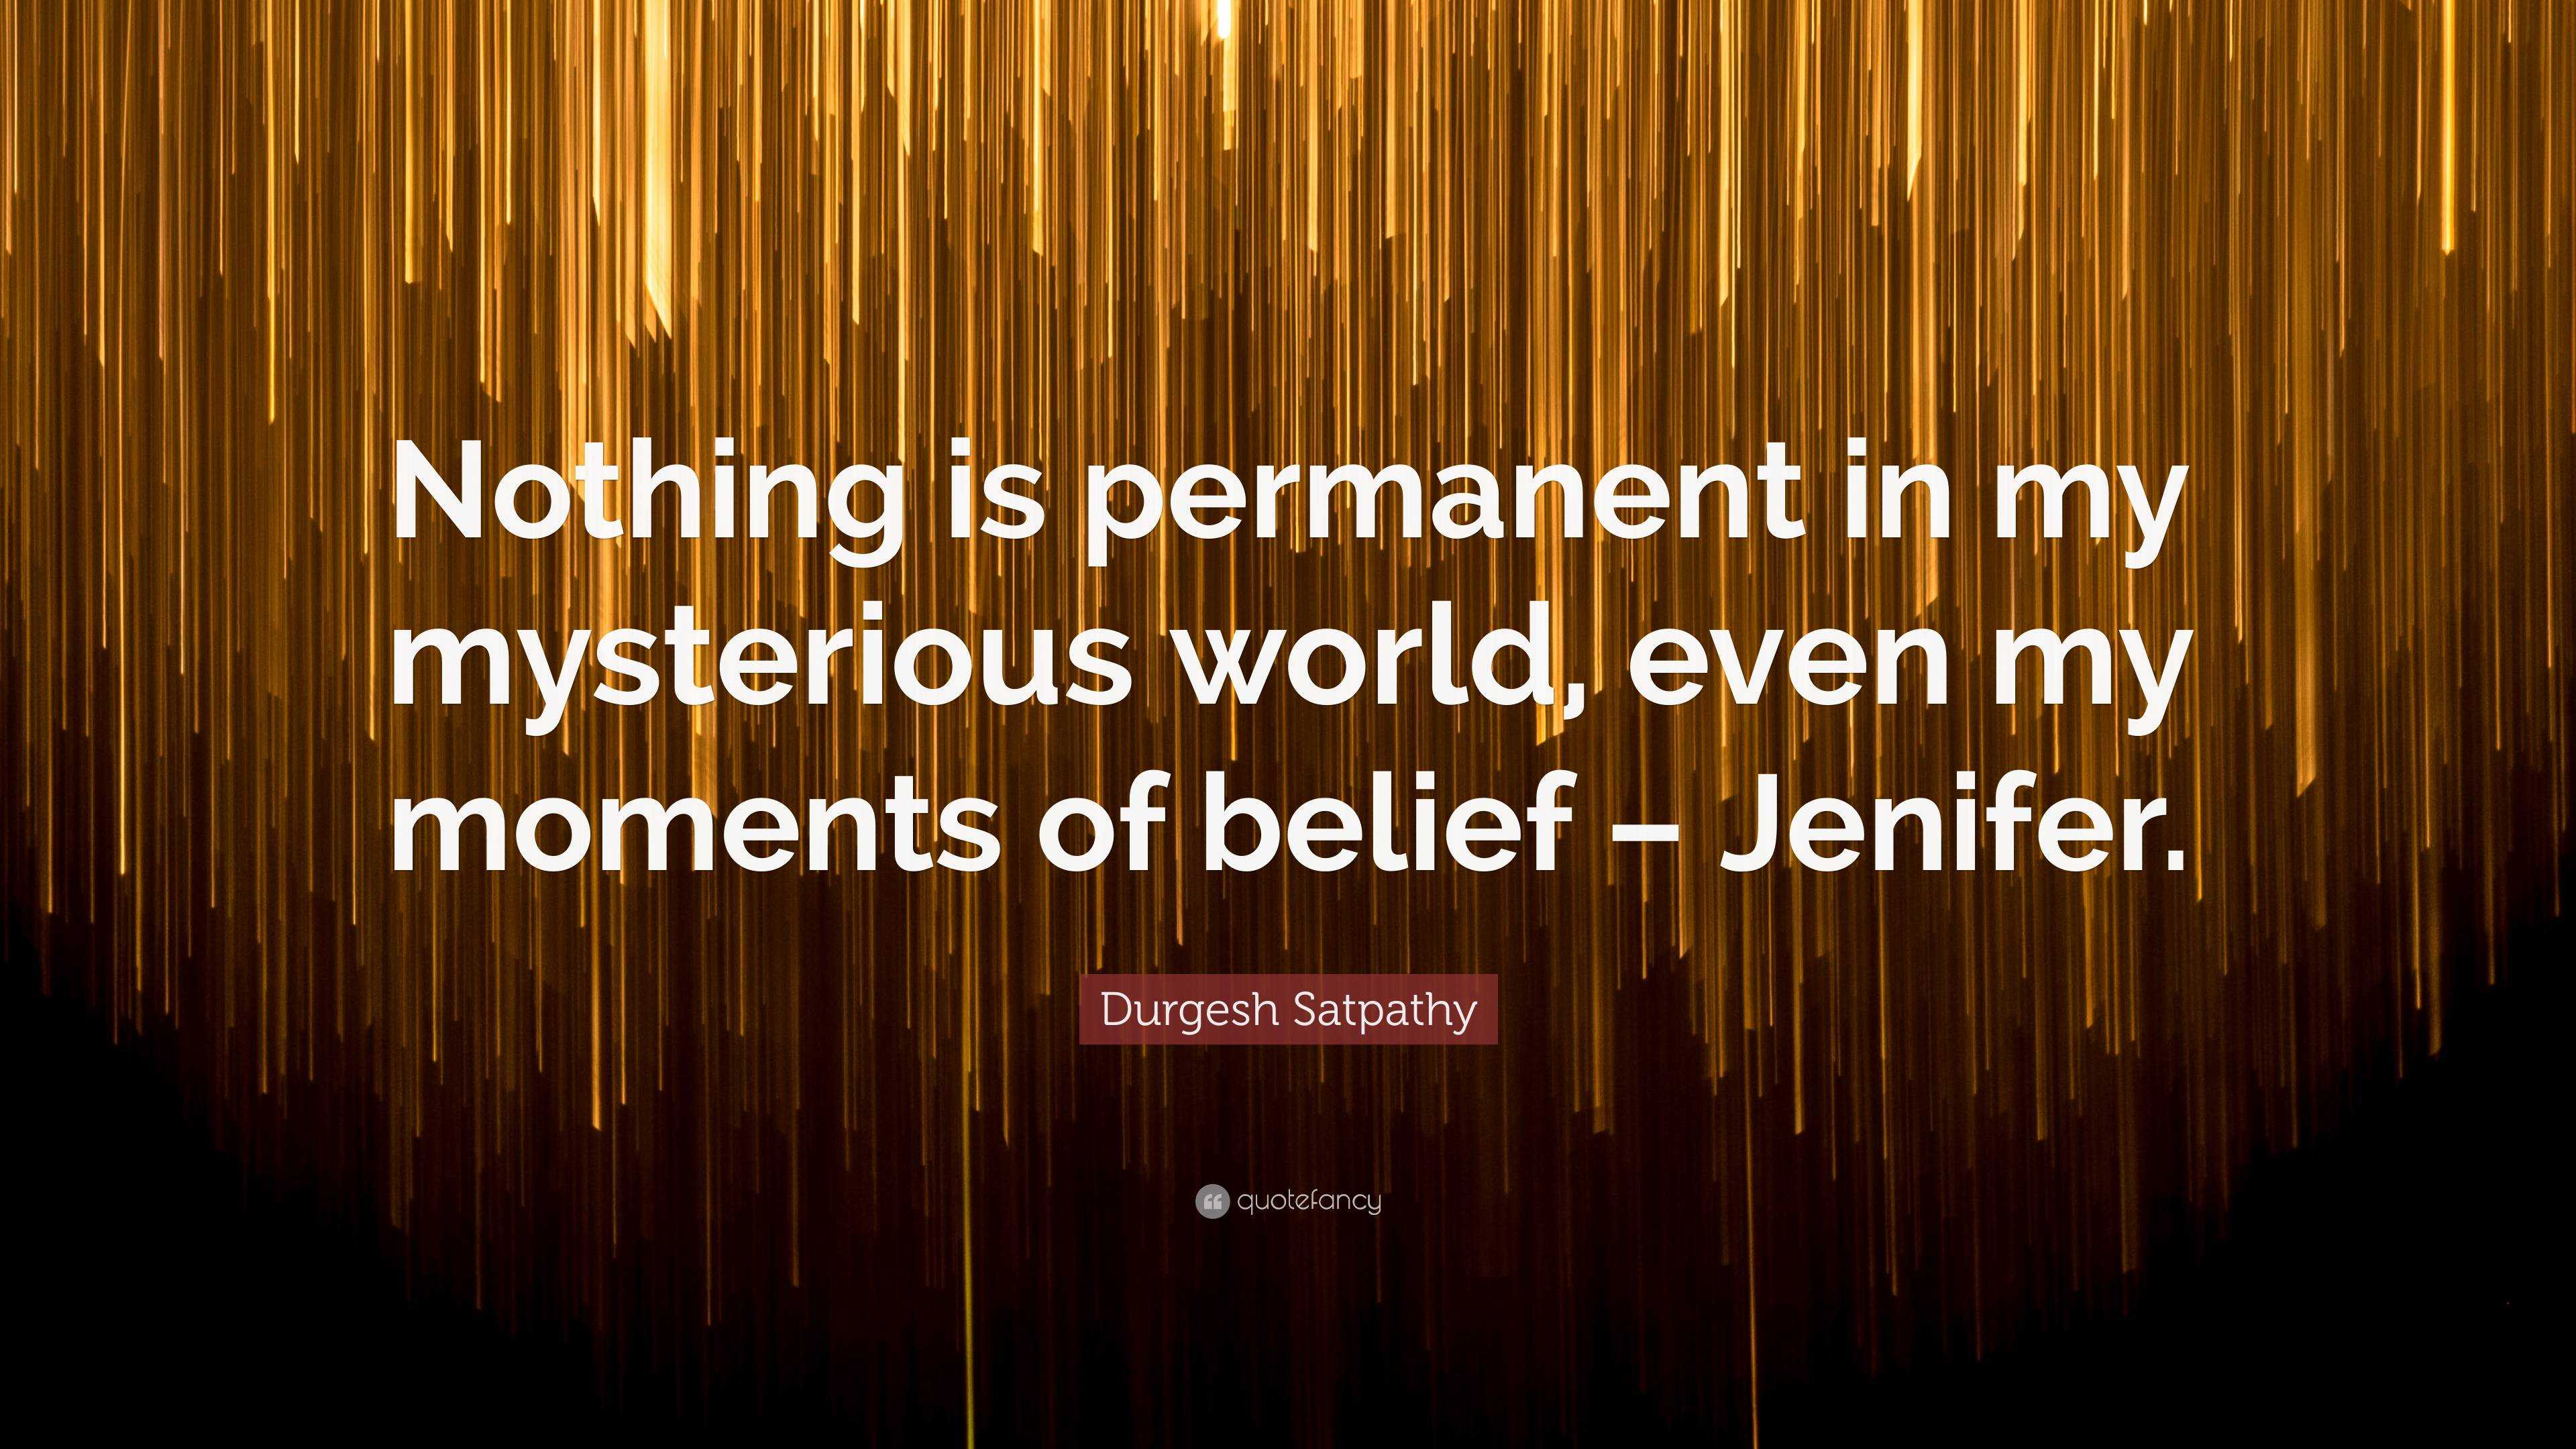 Durgesh Satpathy Quote: “Nothing is permanent in my mysterious world, even  my moments of belief – Jenifer.”